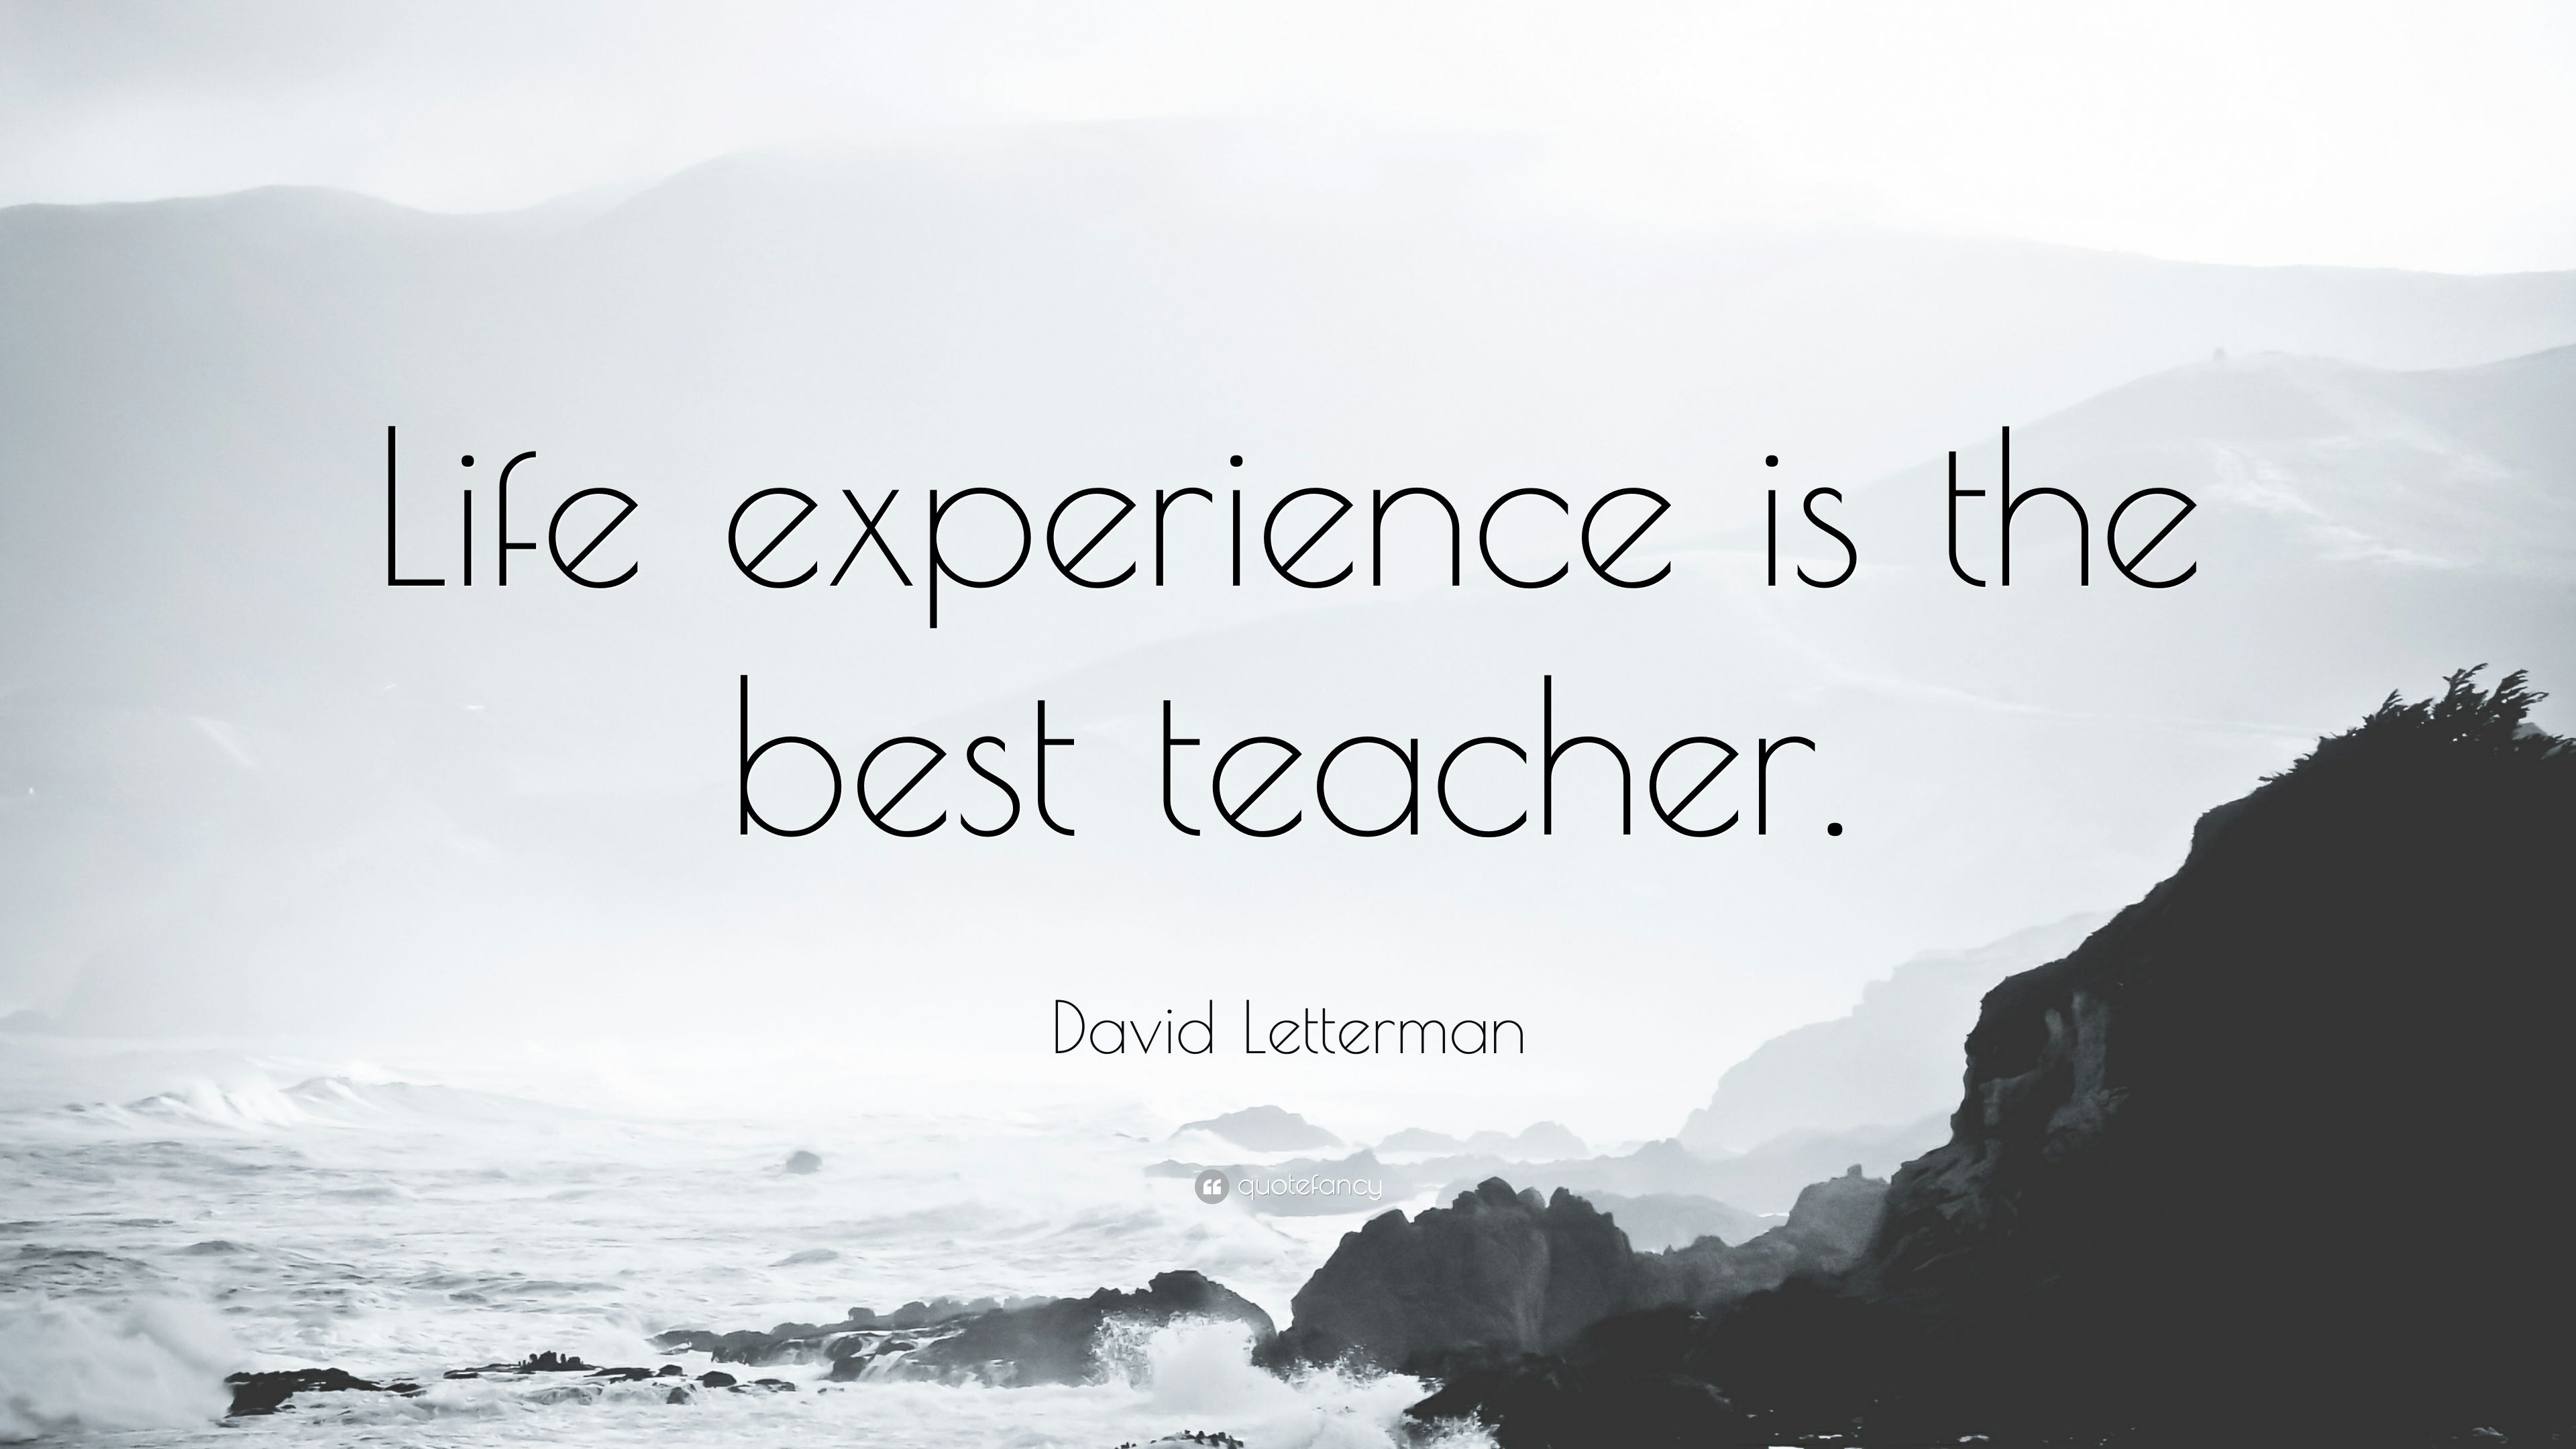 David Letterman Quote: “Life experience is the best teacher.” (10 wallpaper)